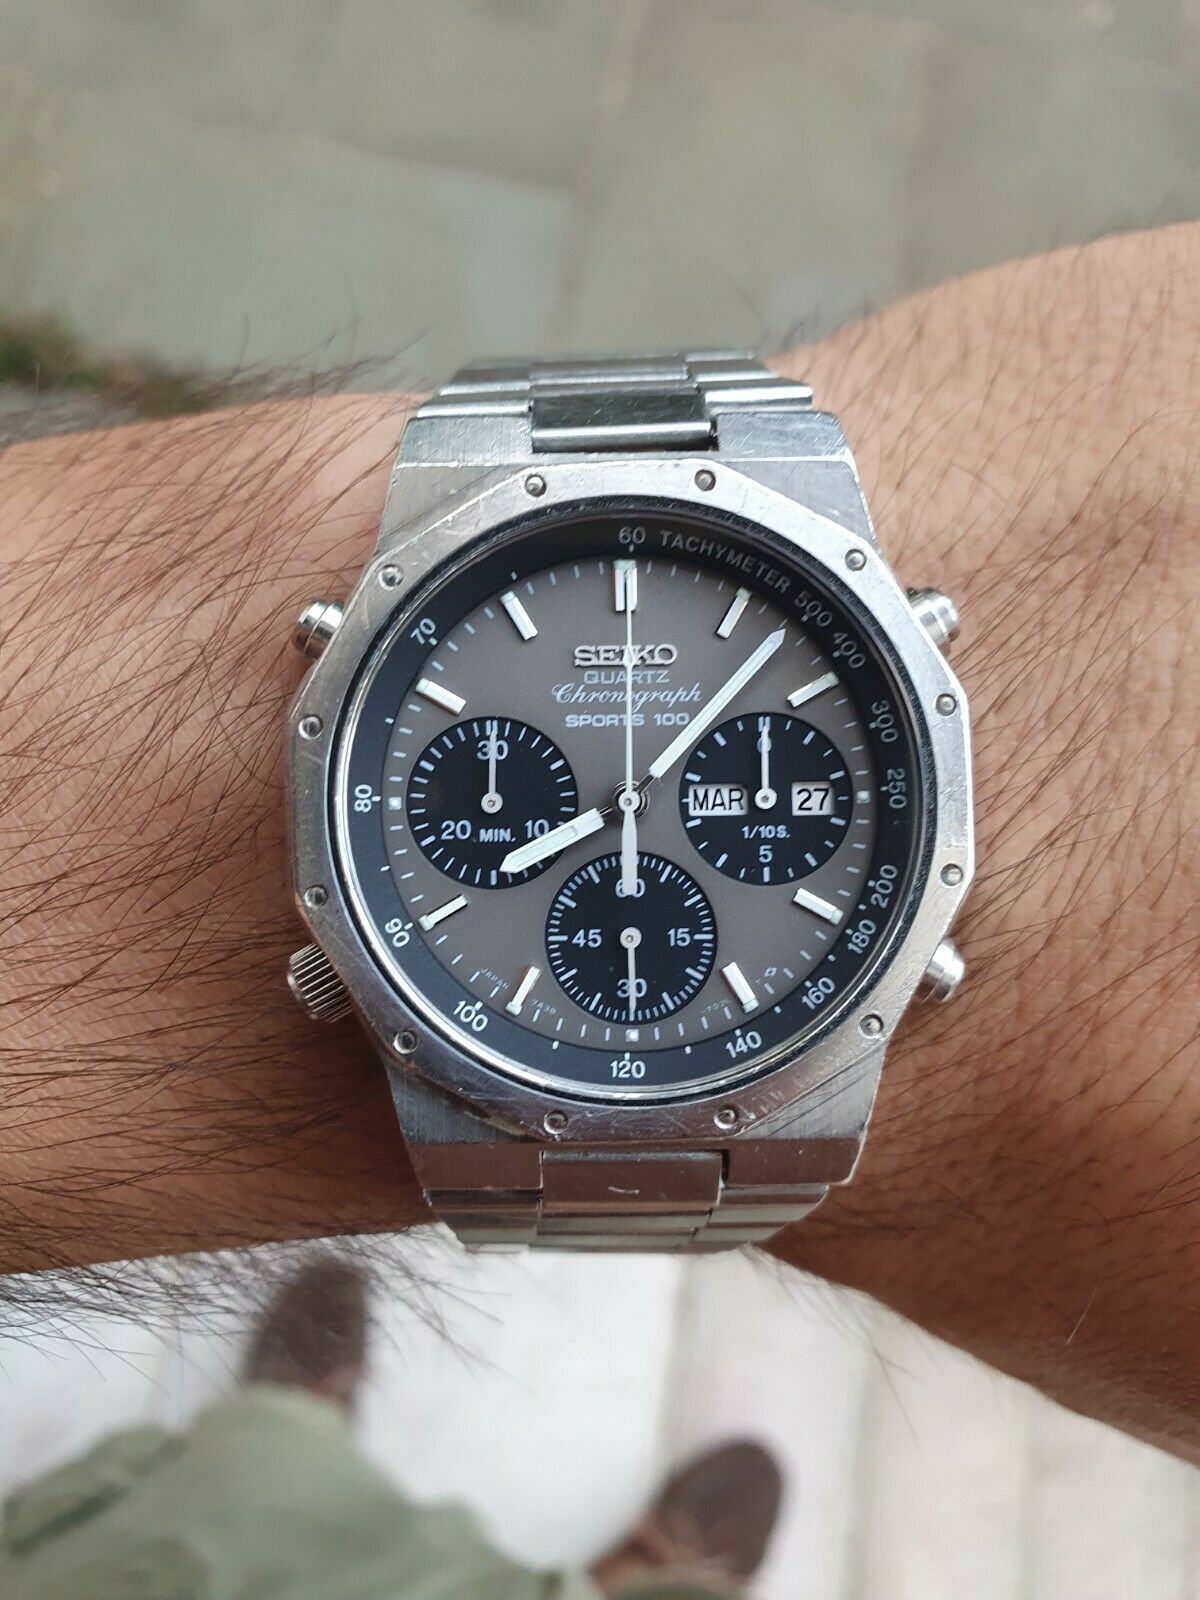 7A38-7029-Stainless+Grey-eBay-July2021-AndAnother-2.jpg